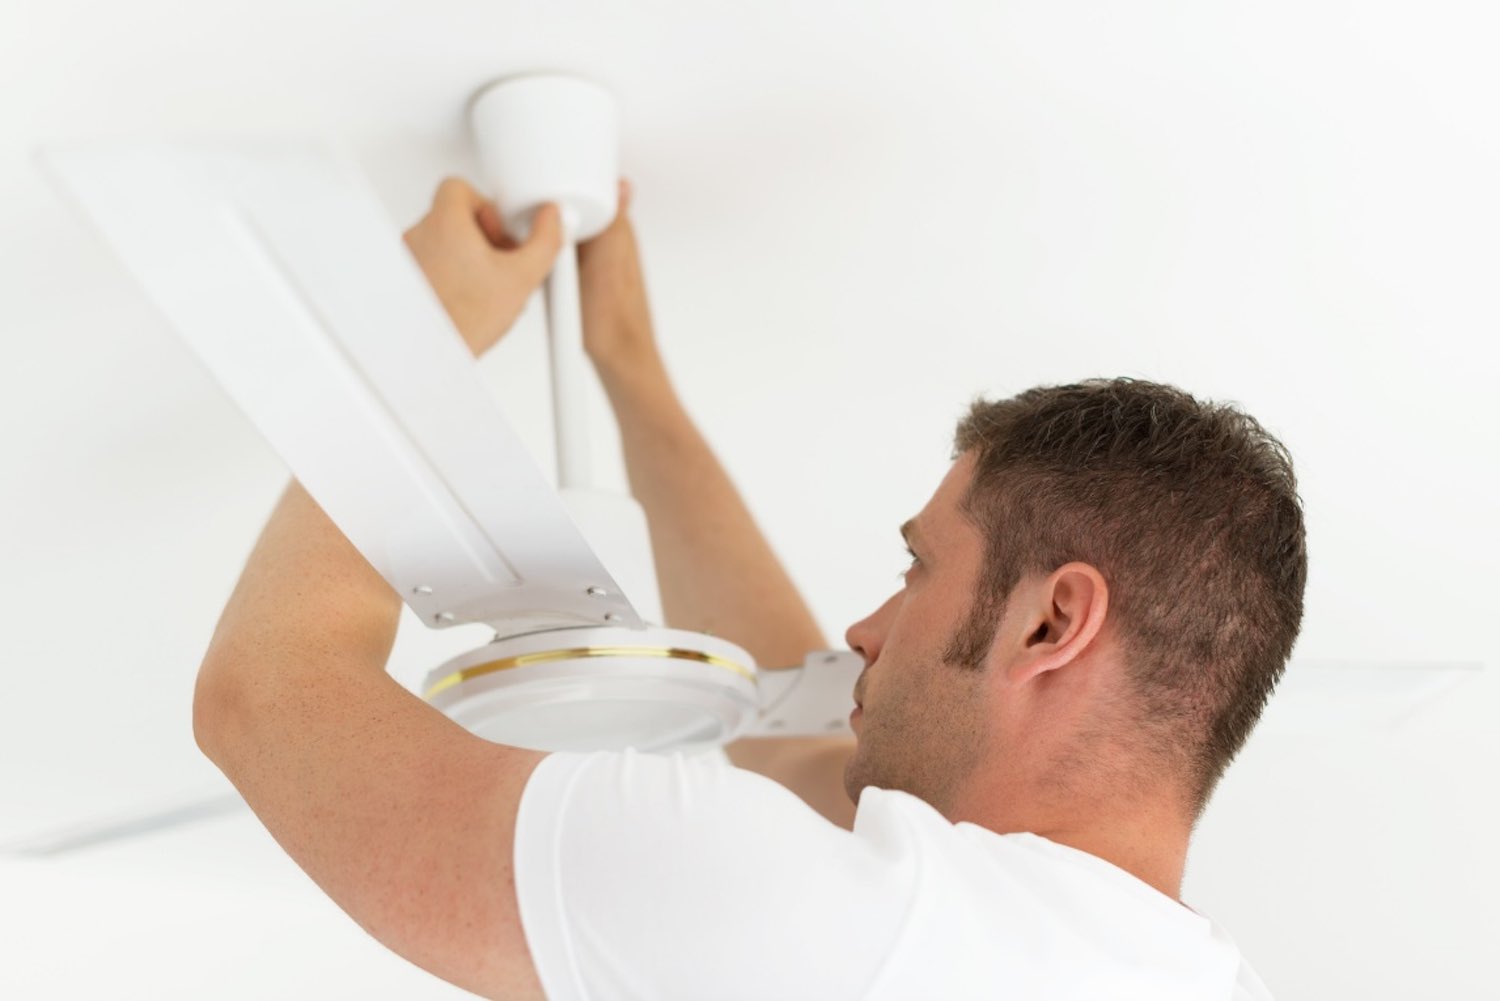 How to Install a Ceiling Fan- The Basic Steps Explained